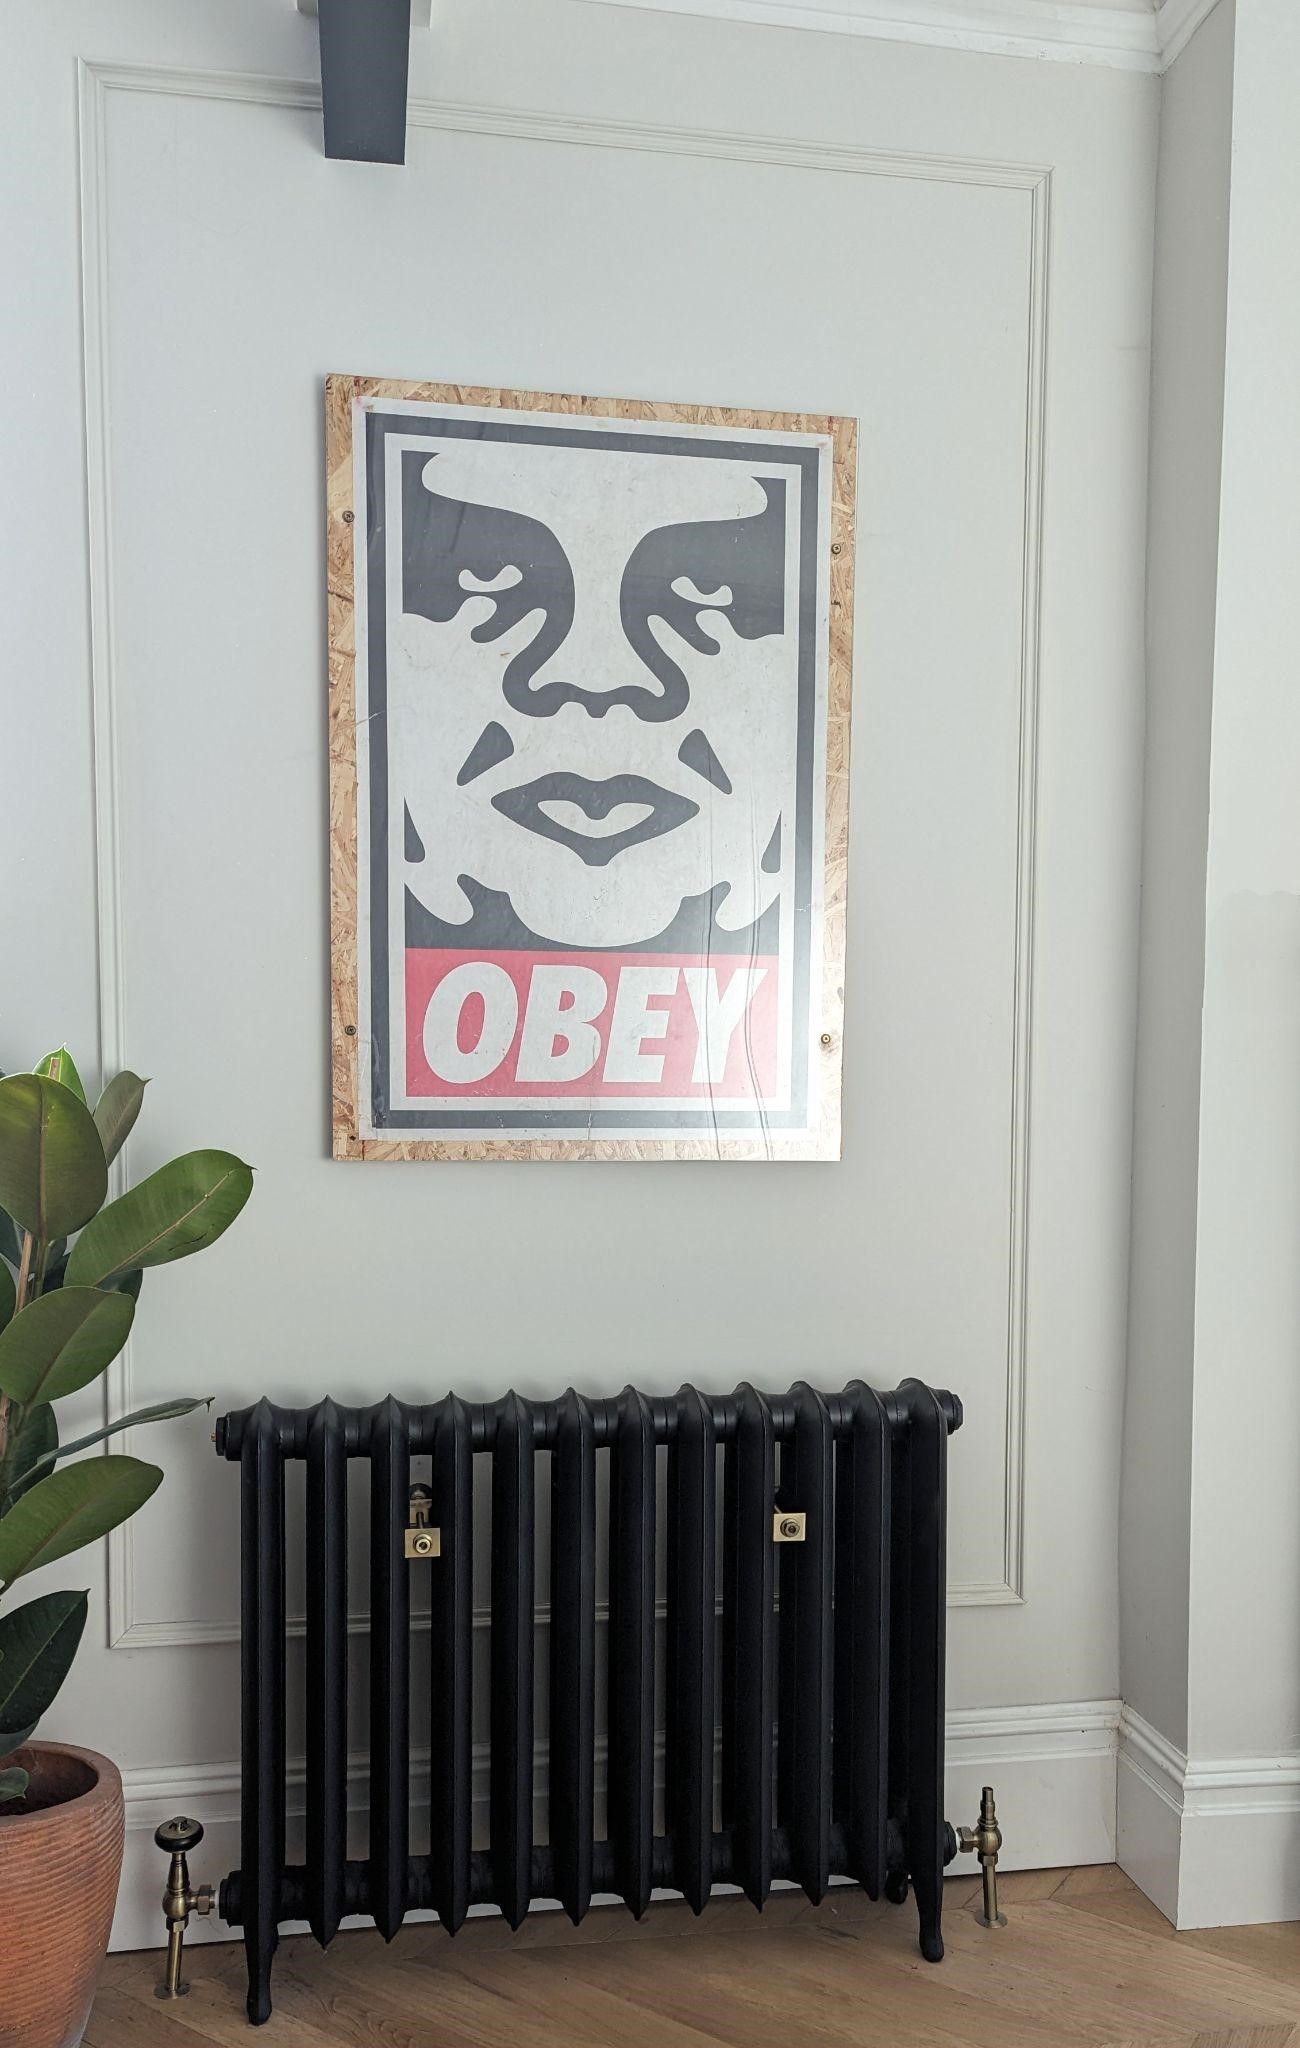 cast iron radiators making a comeback with obey picture